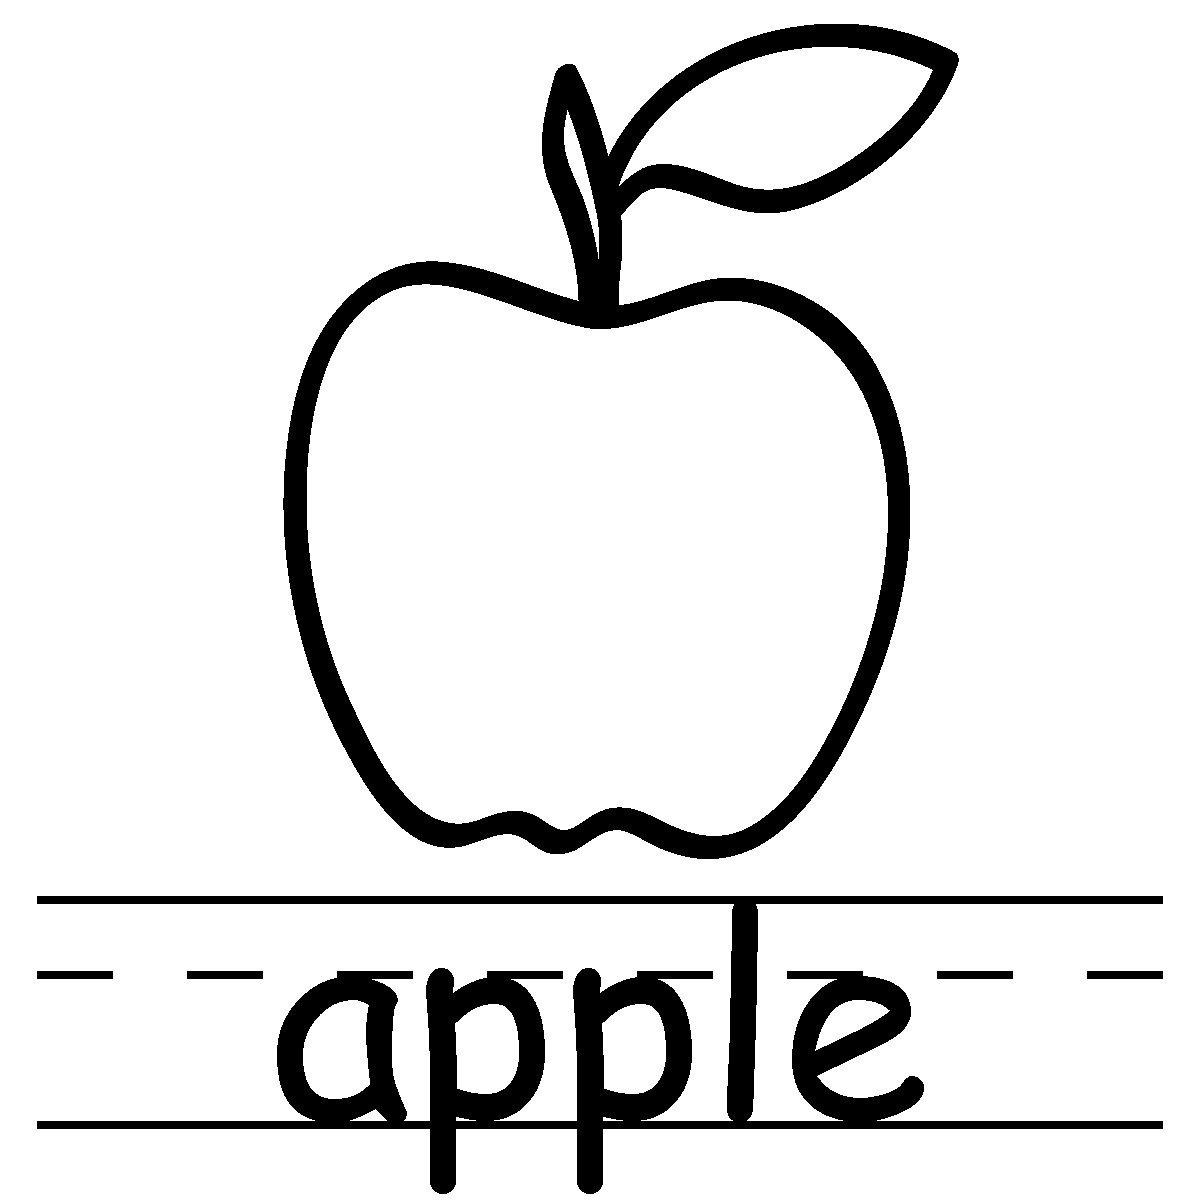 Apple Clip Art Black And White   Clipart Panda   Free Clipart Images